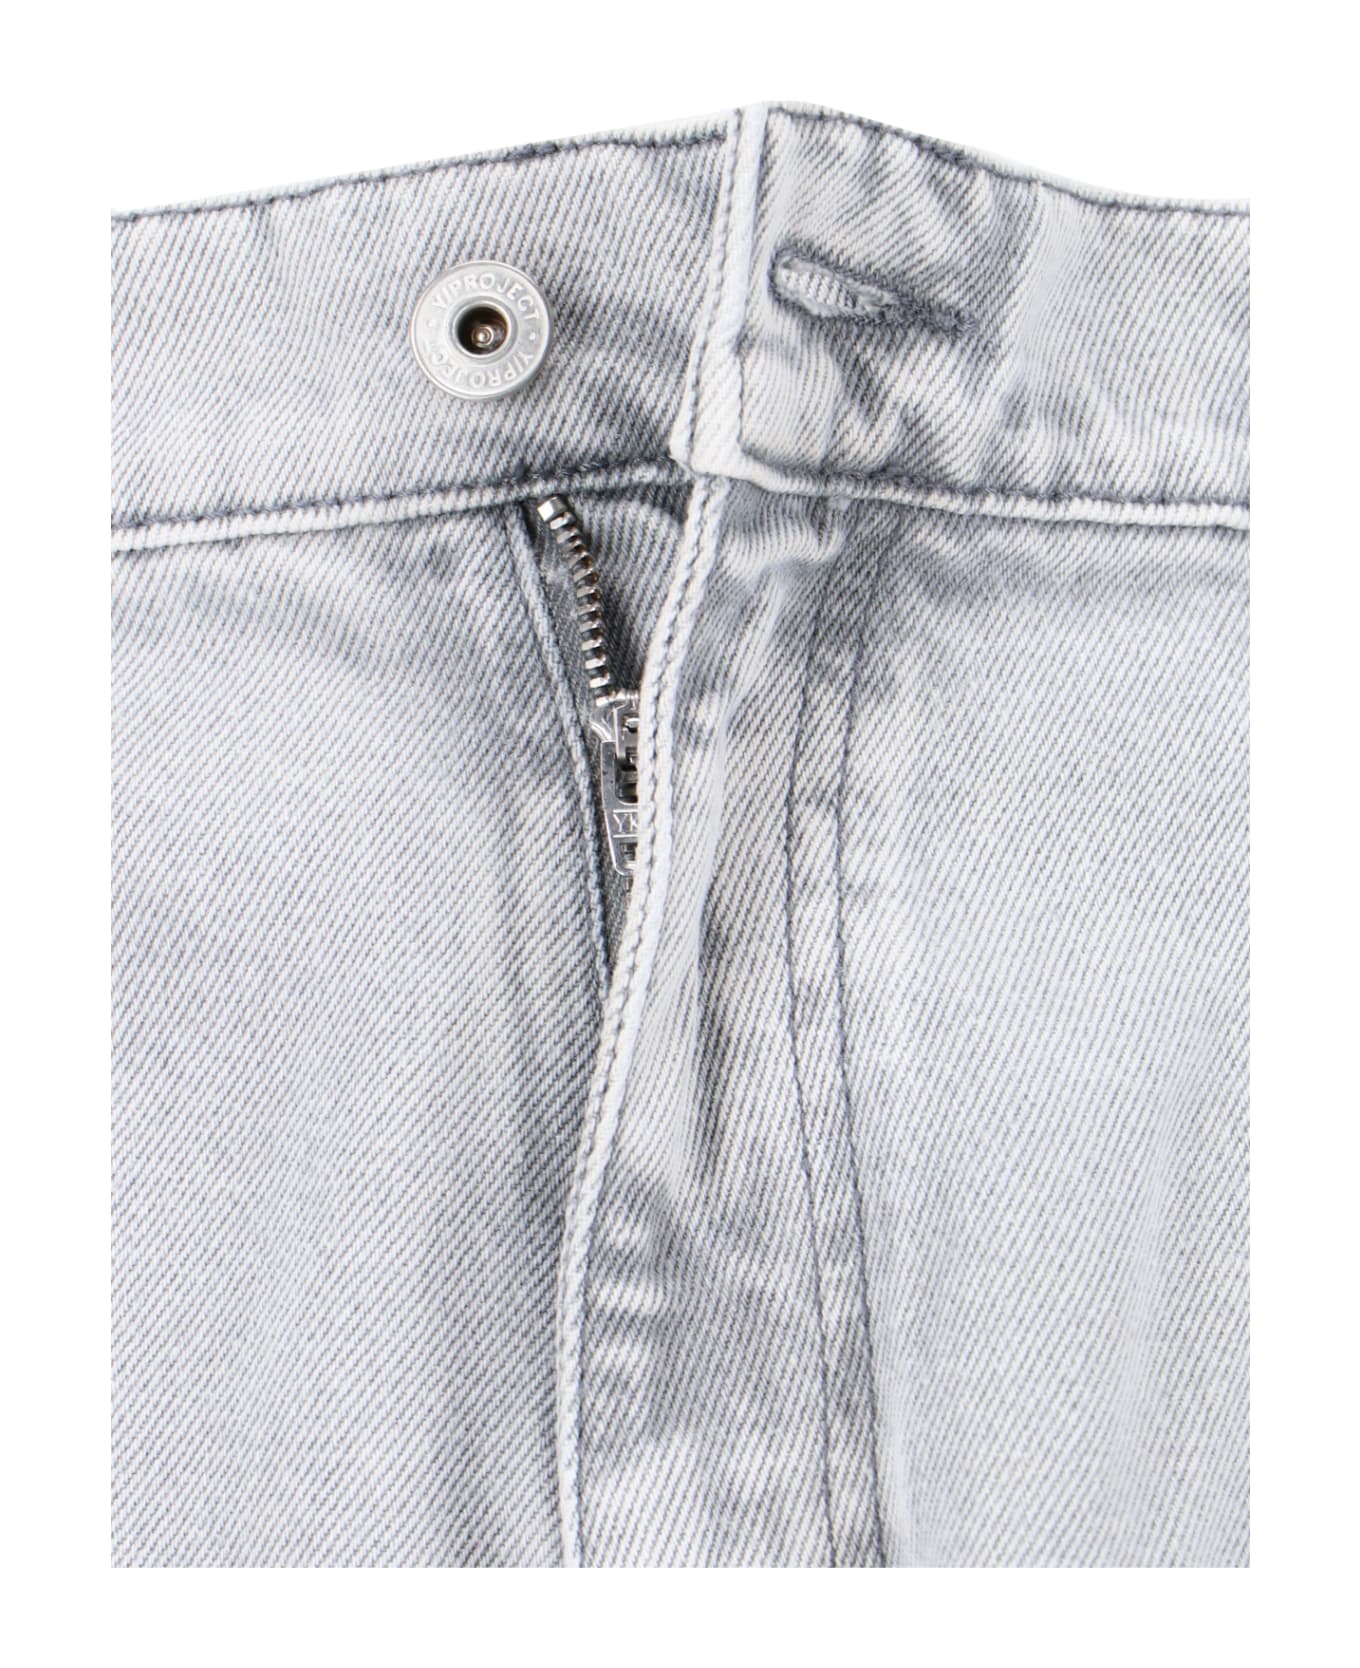 Y/Project 'banana' Jeans - Gray name:463